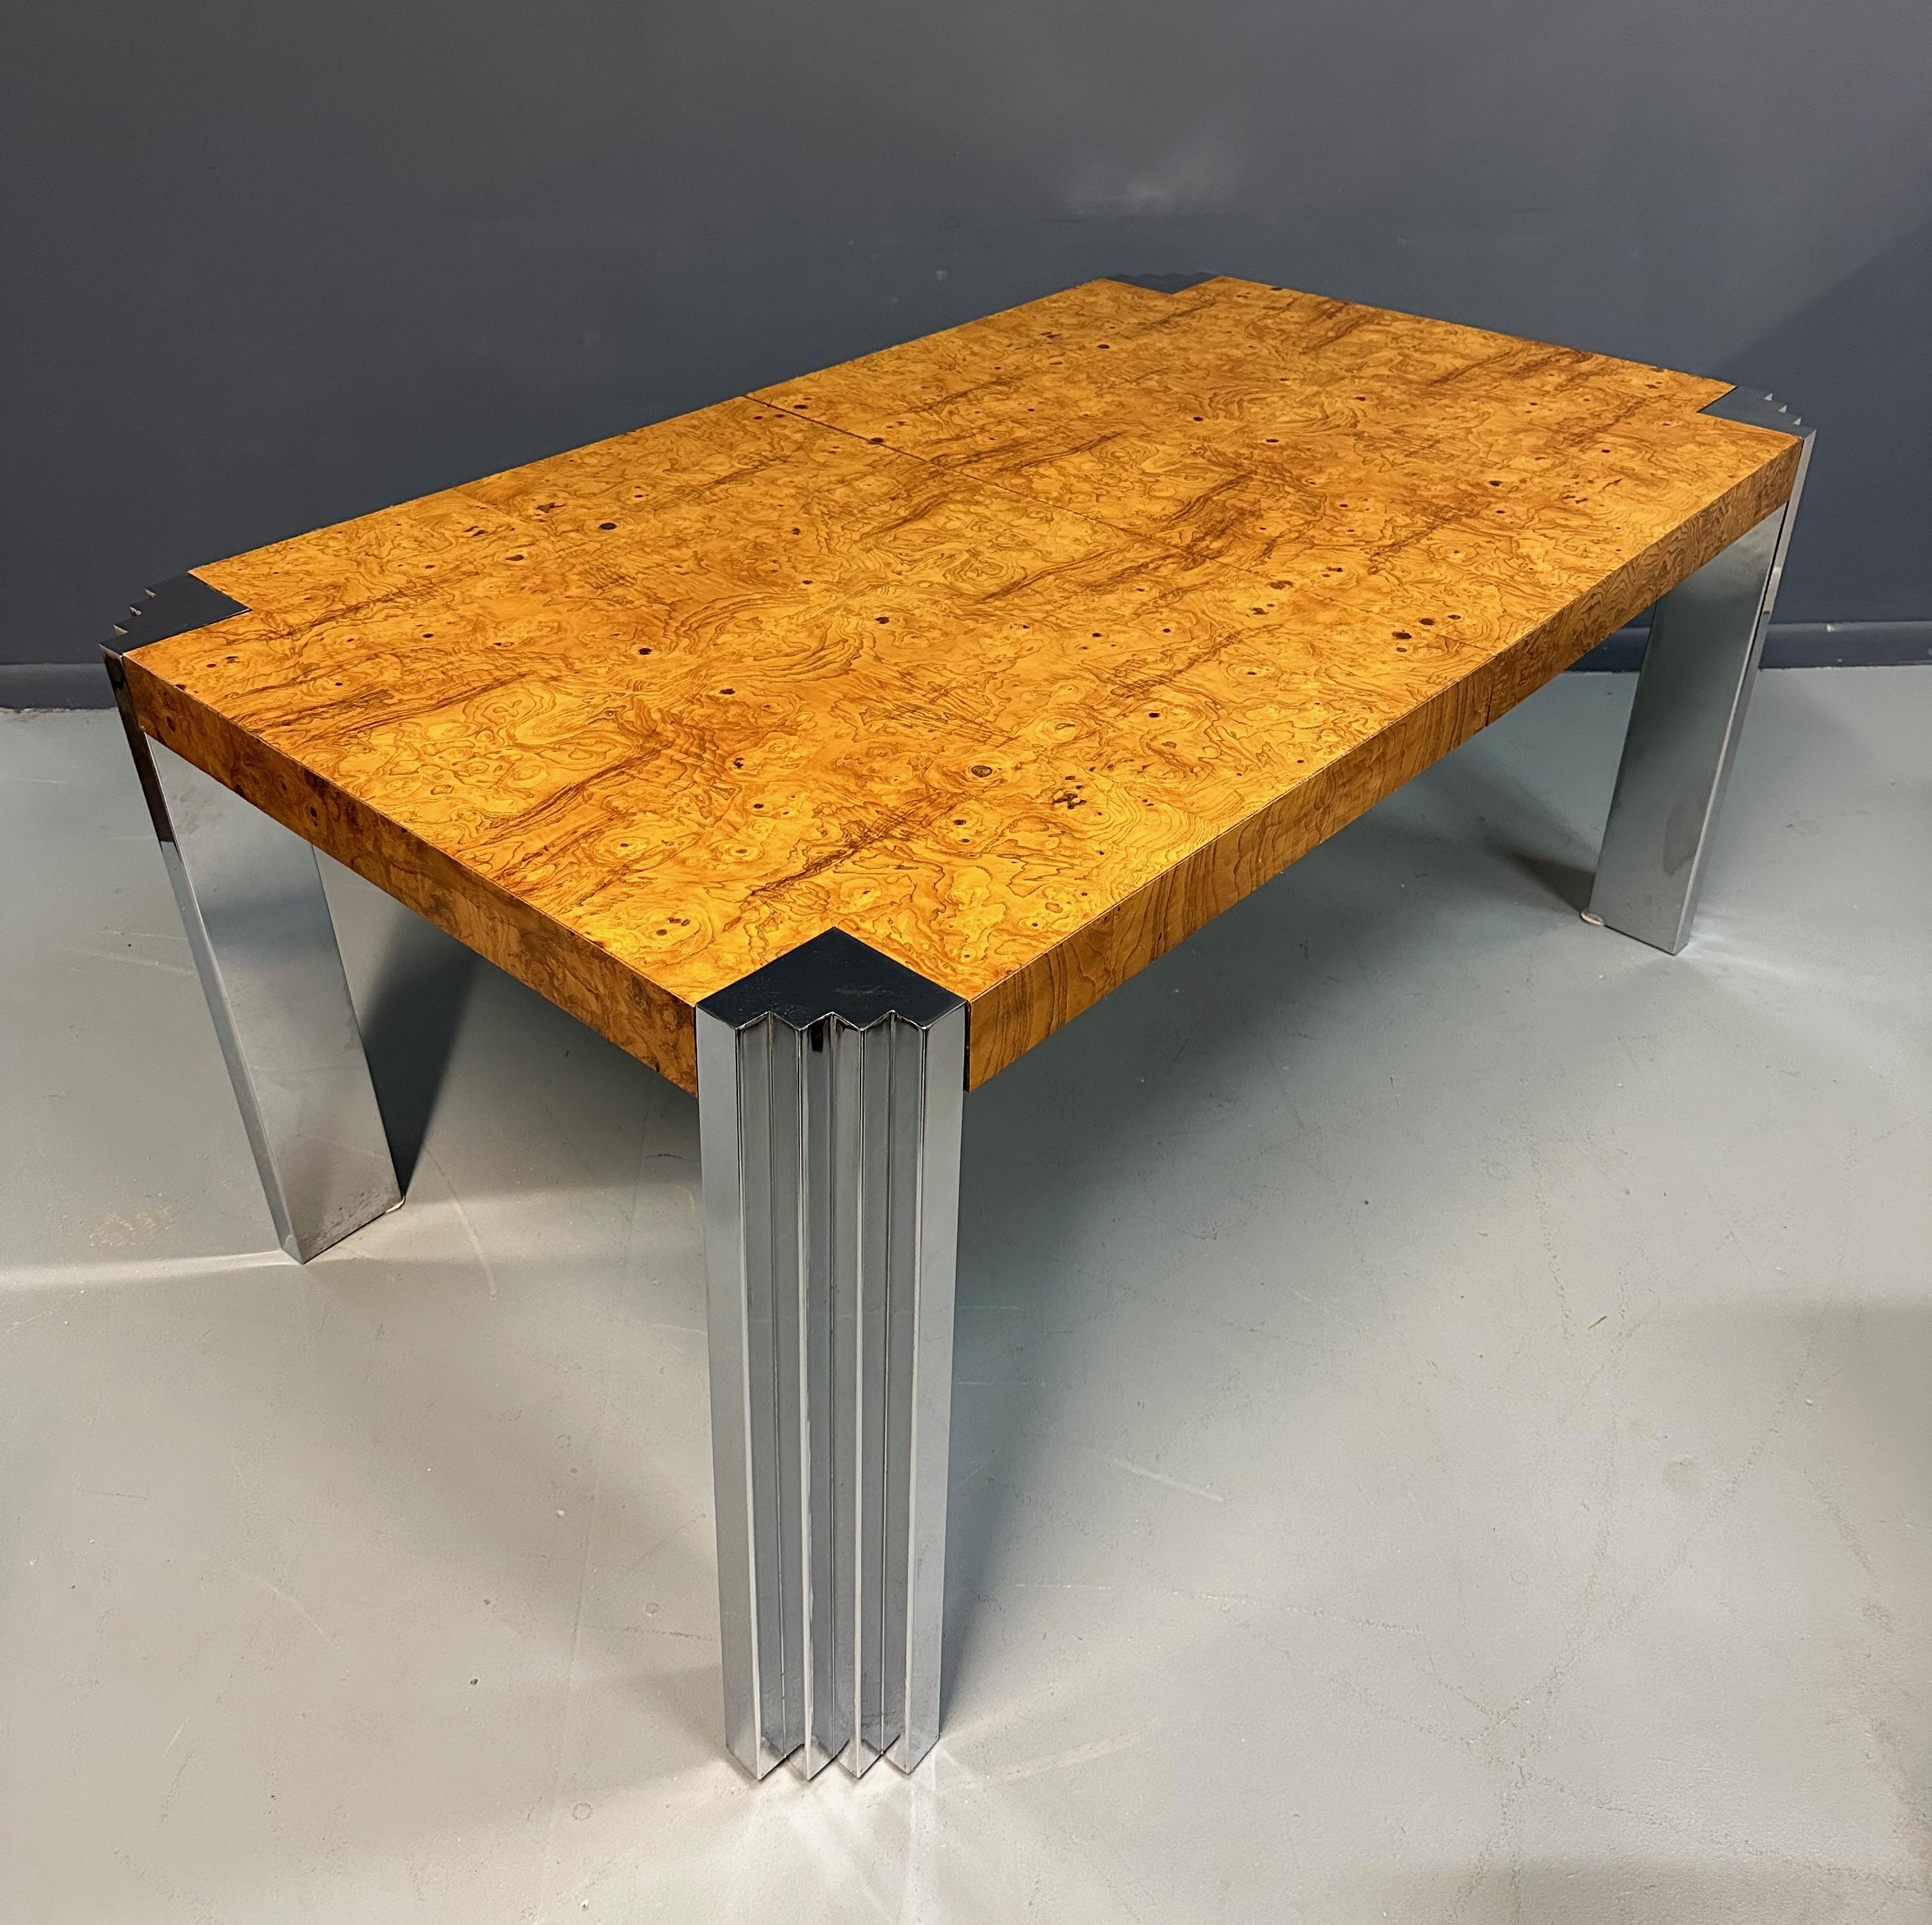 A stunning mid-century modern olive, burl wood and chrome dining table attributed to Milo Baughman for Thayer Coggin. The lines are clean and elegant. Features rich warm book-matched olive burl wood square top with detailed chrome accent to each